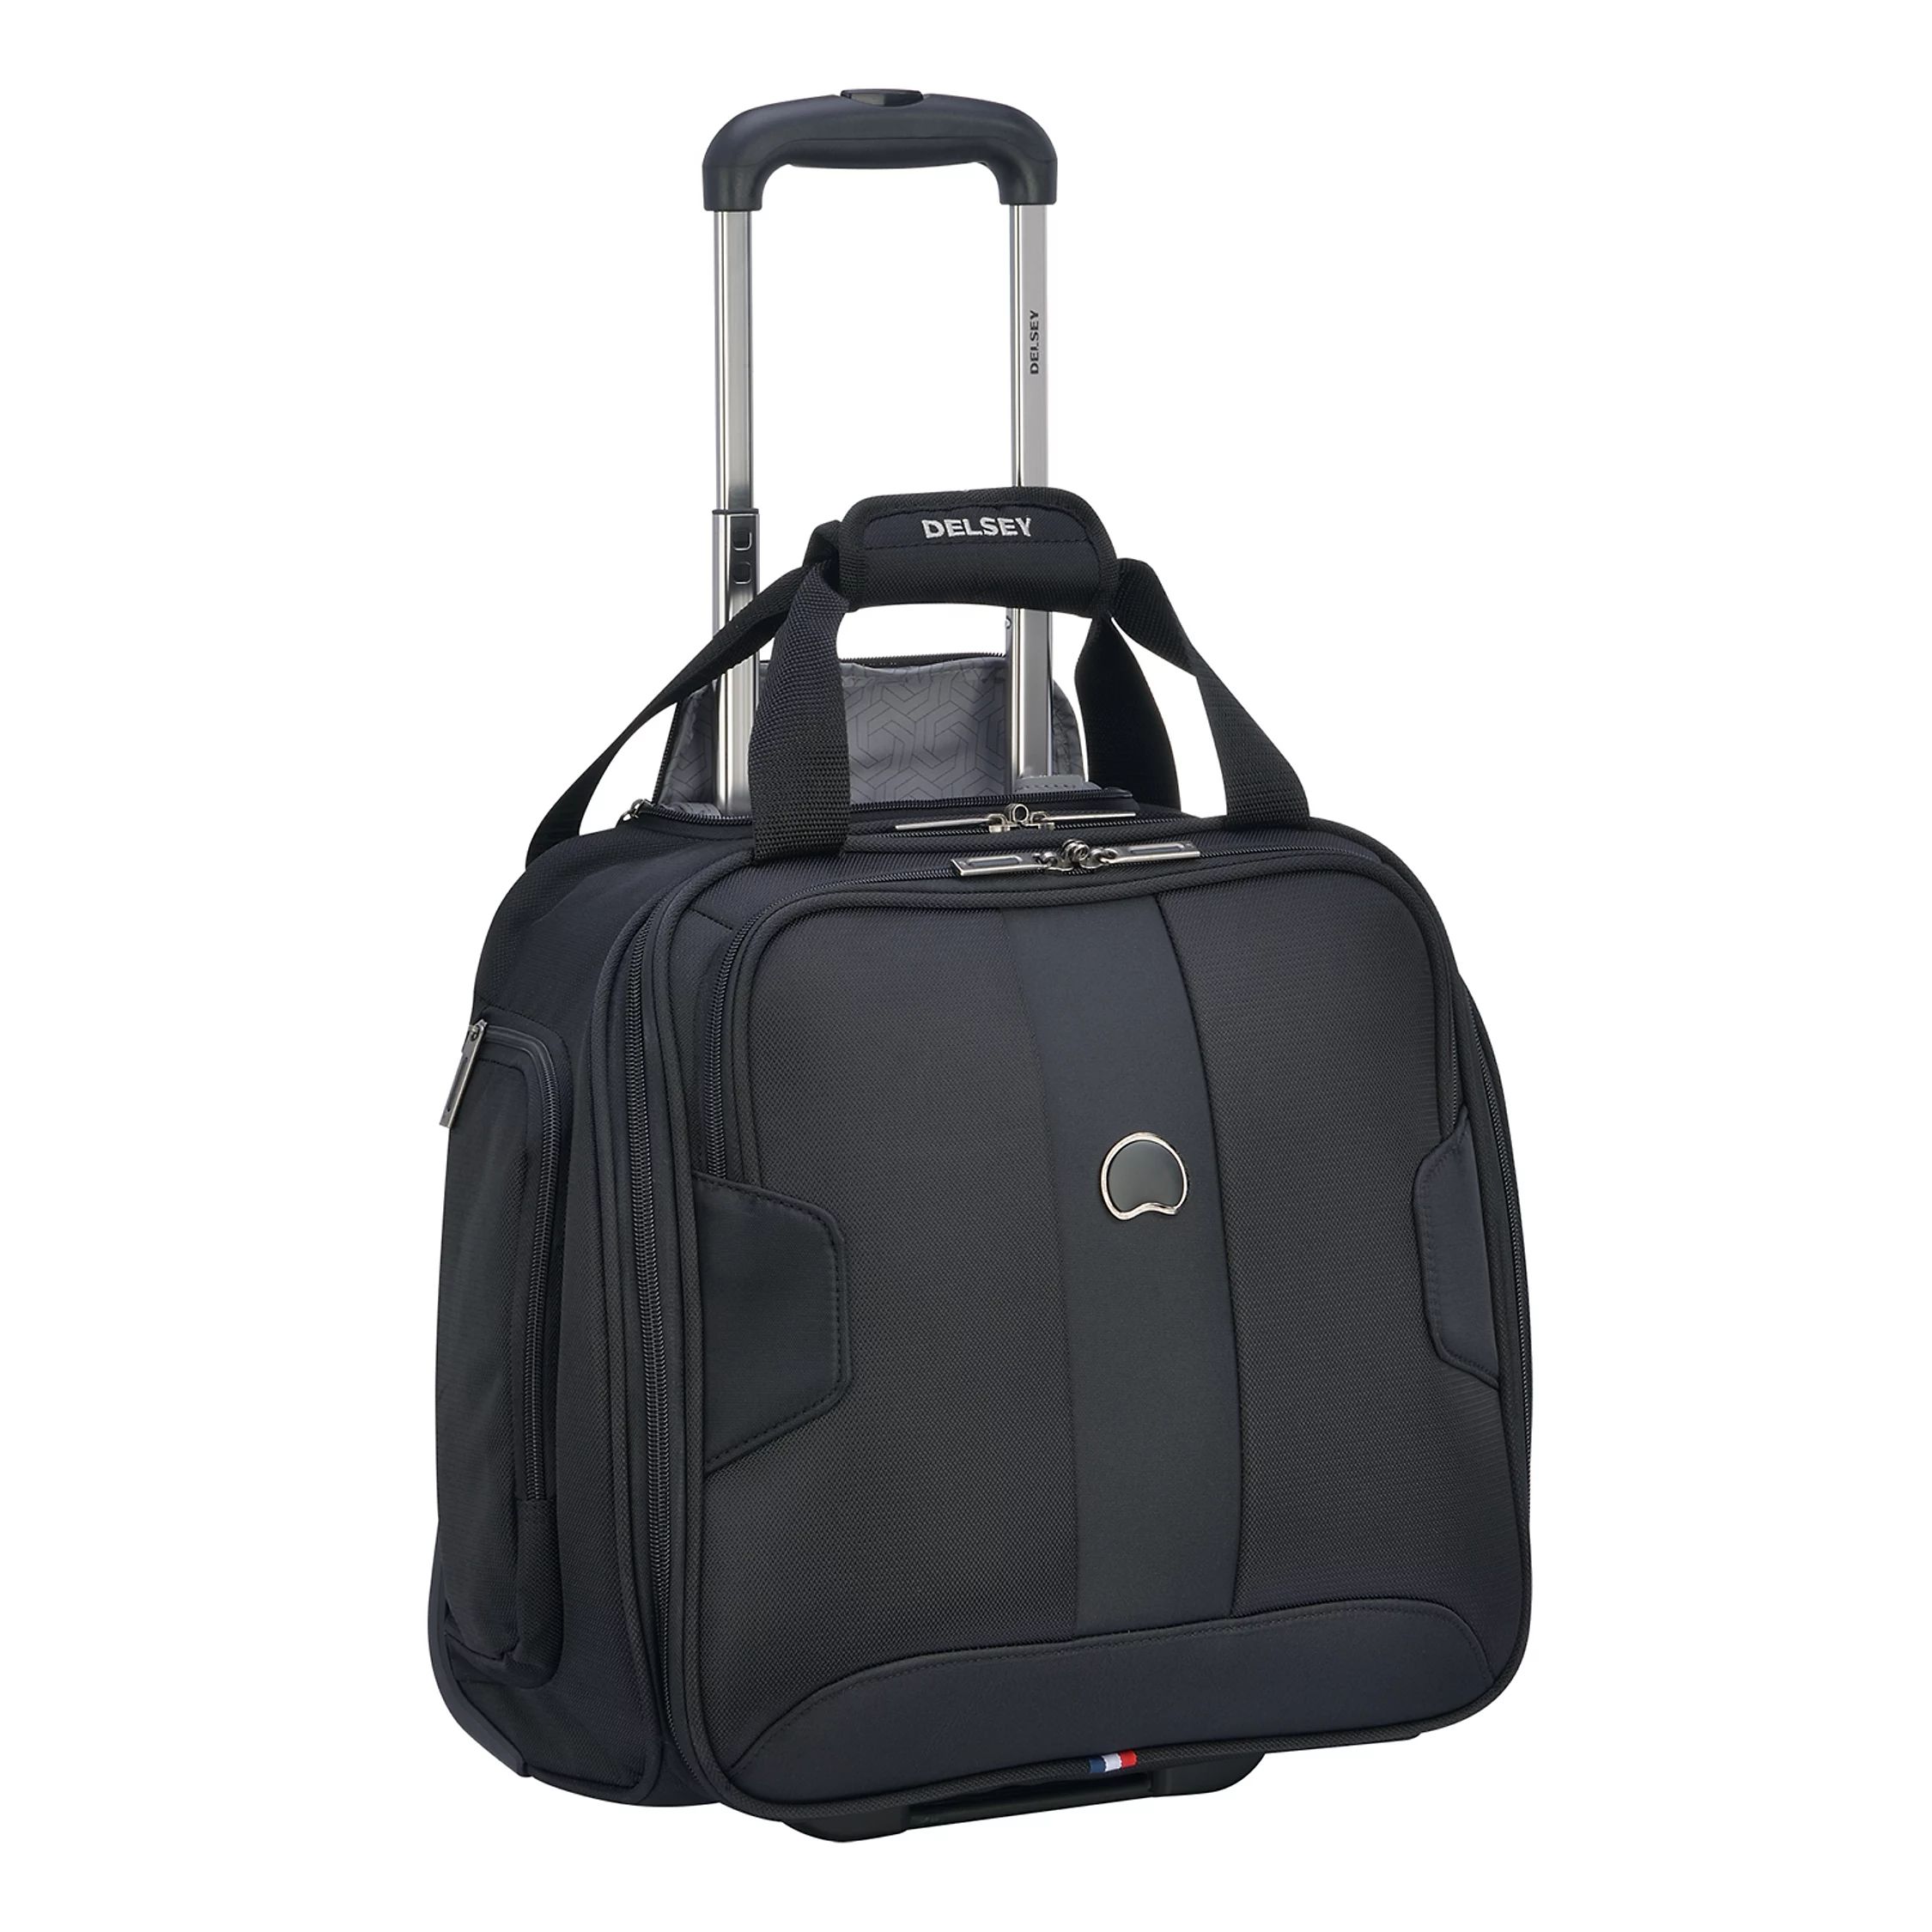 Delsey Sky Max Wheeled Underseater Carry-on Luggage | Kohl's